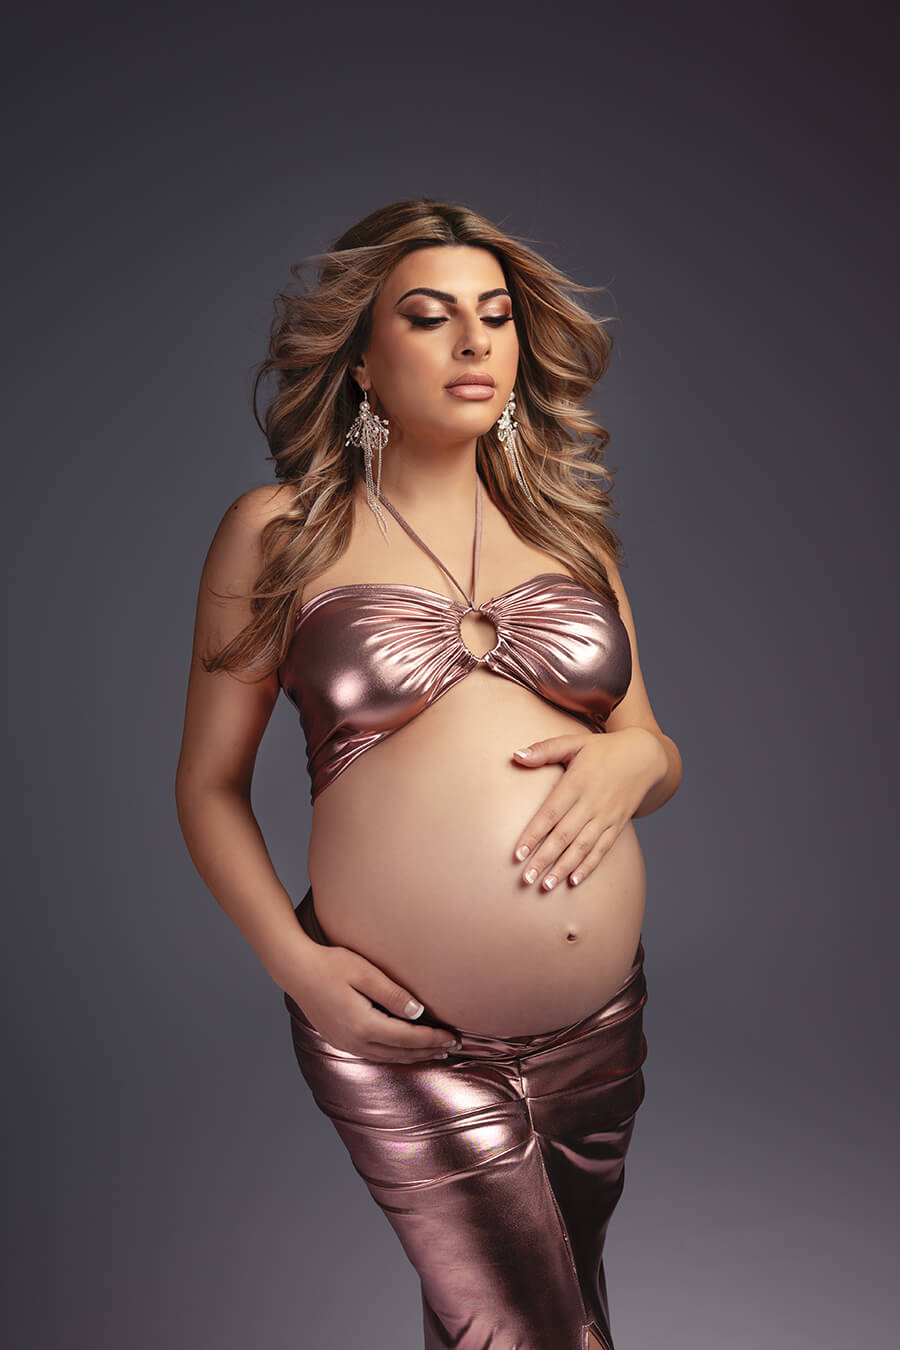 close up of blond pregnant model posing in a studio holding gently her belly bump. she is wearing a lamee set in dusty pink color. the top has a keyhole peekaboo detail and the skirt is tight